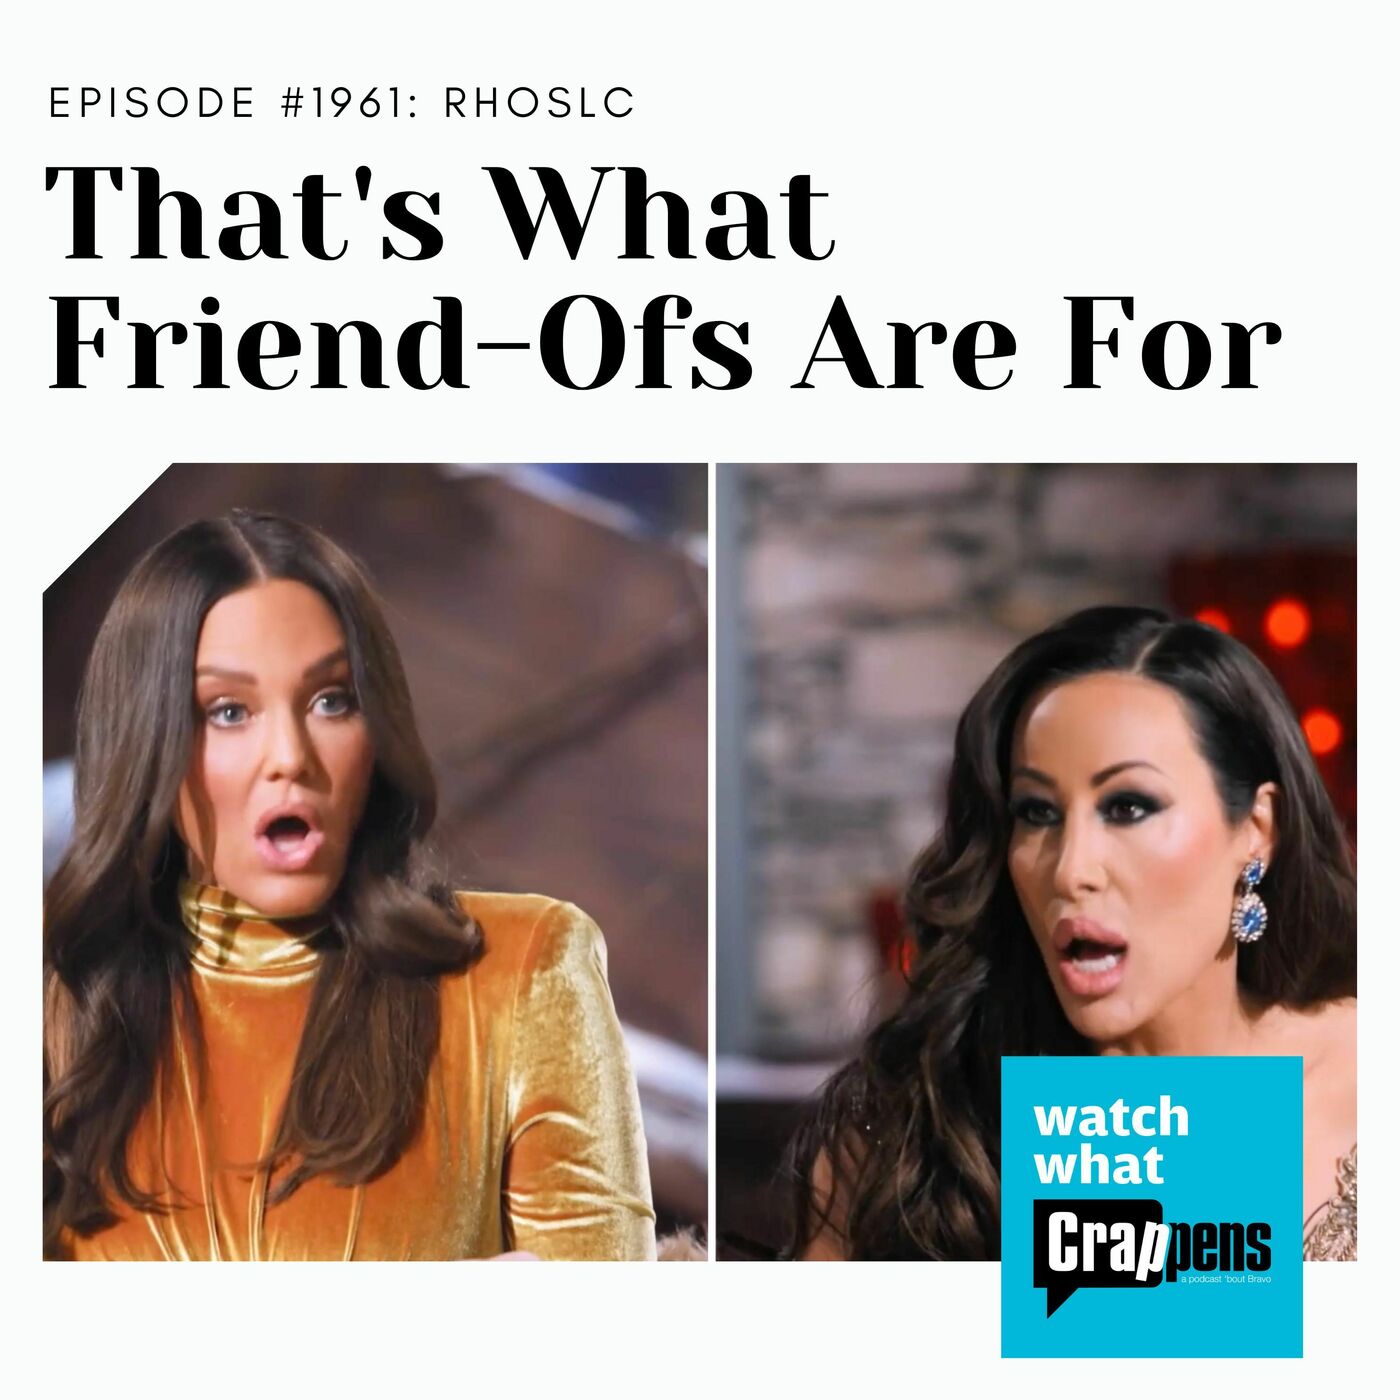 RHOSLC: That's What Friend-Ofs Are For